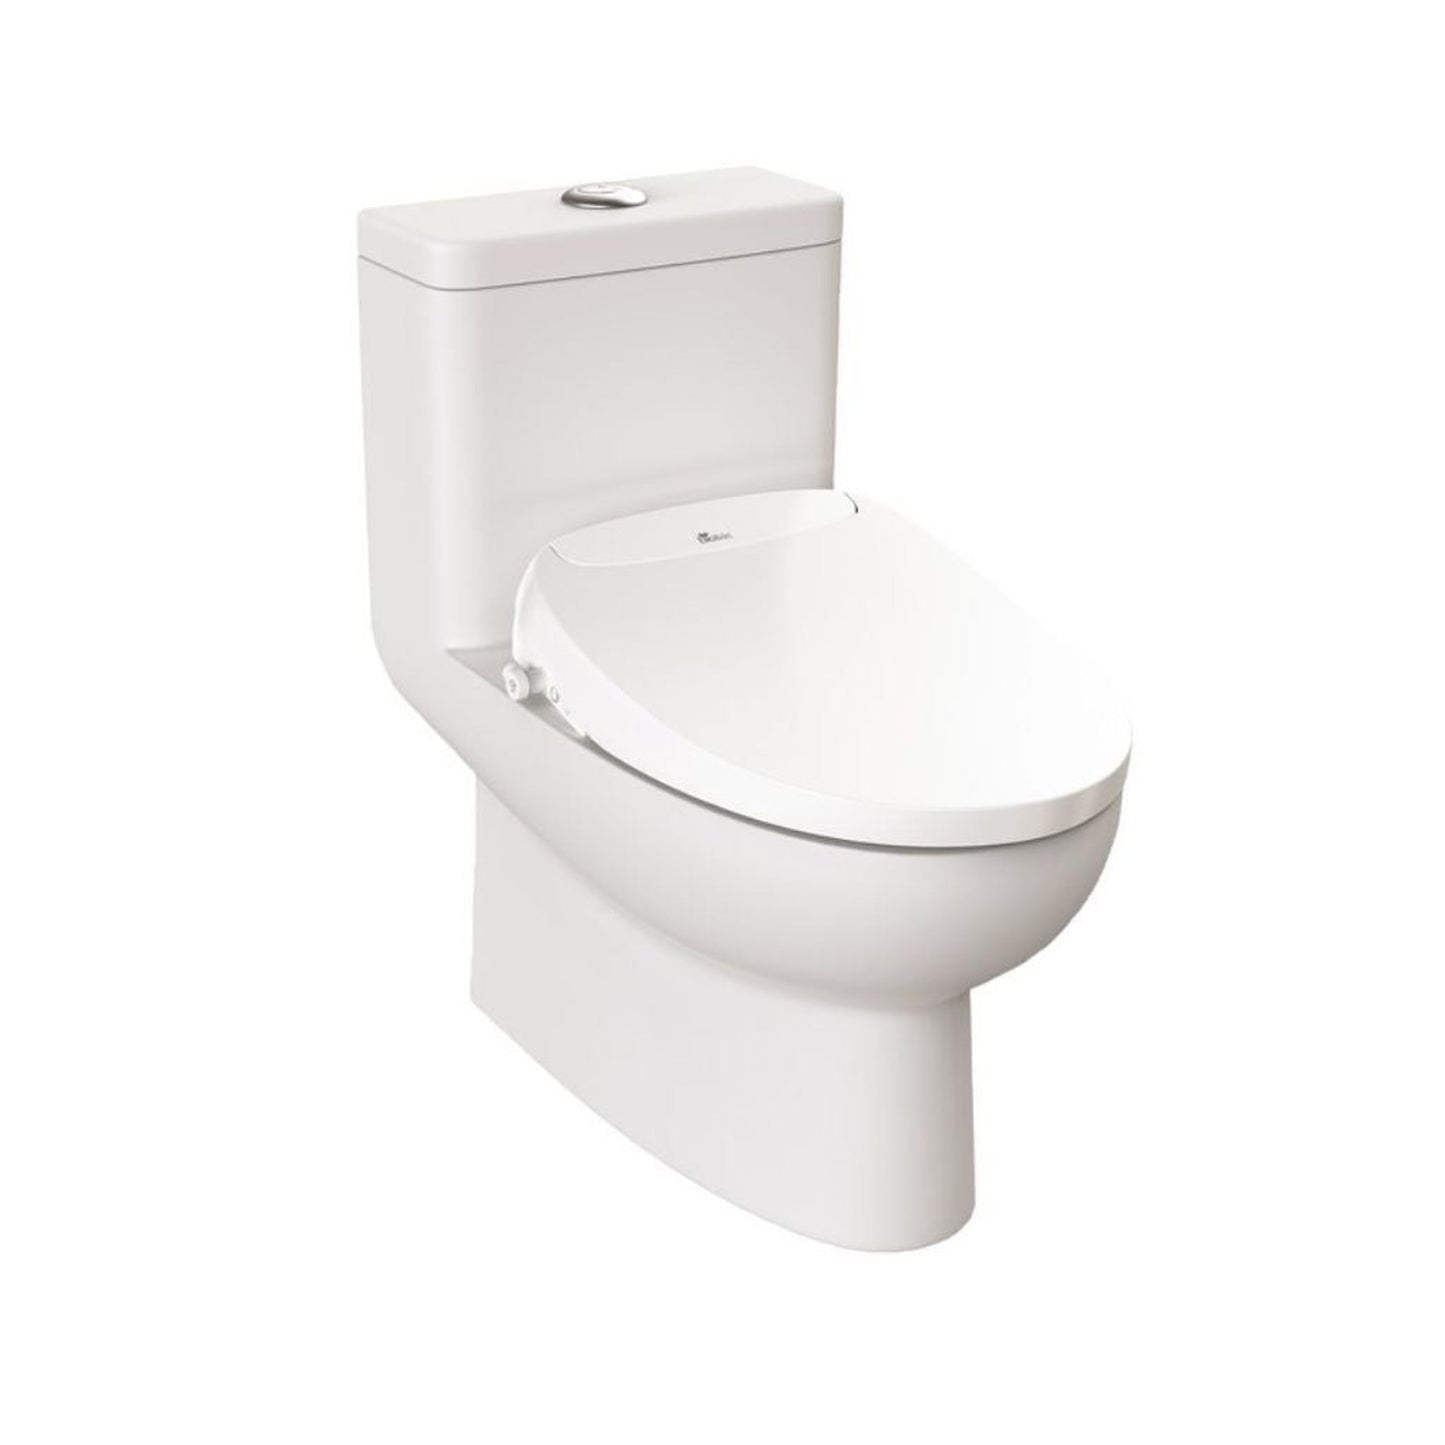 Bio Bidet Discovery DLS 16" White Elongated Bidet Toilet Seat With Built-in UV Sterilizer And Wireless Remote Control